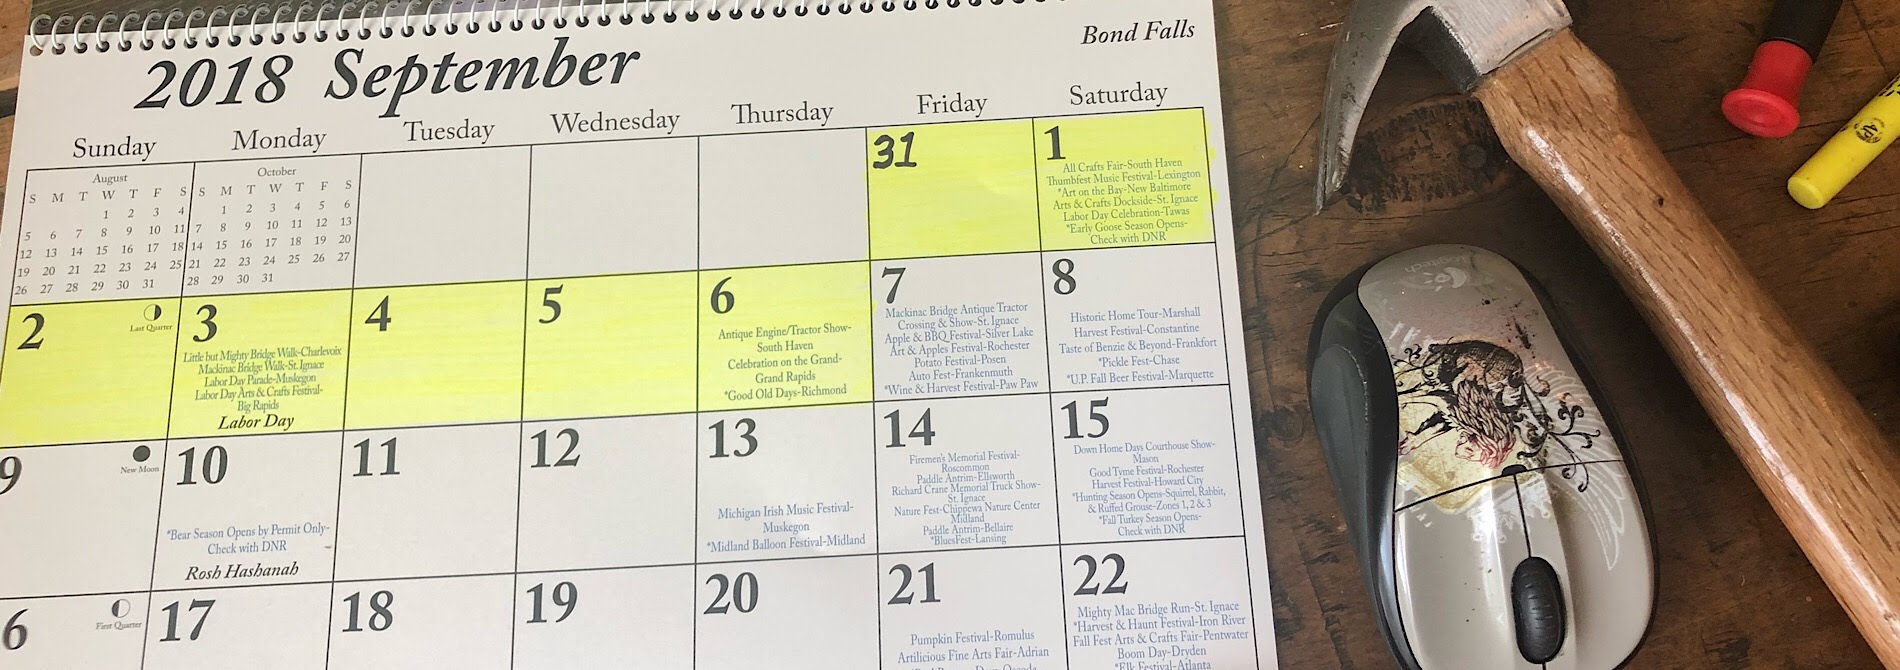 September 2018 calendar with Labor Day week in yellow highlighter